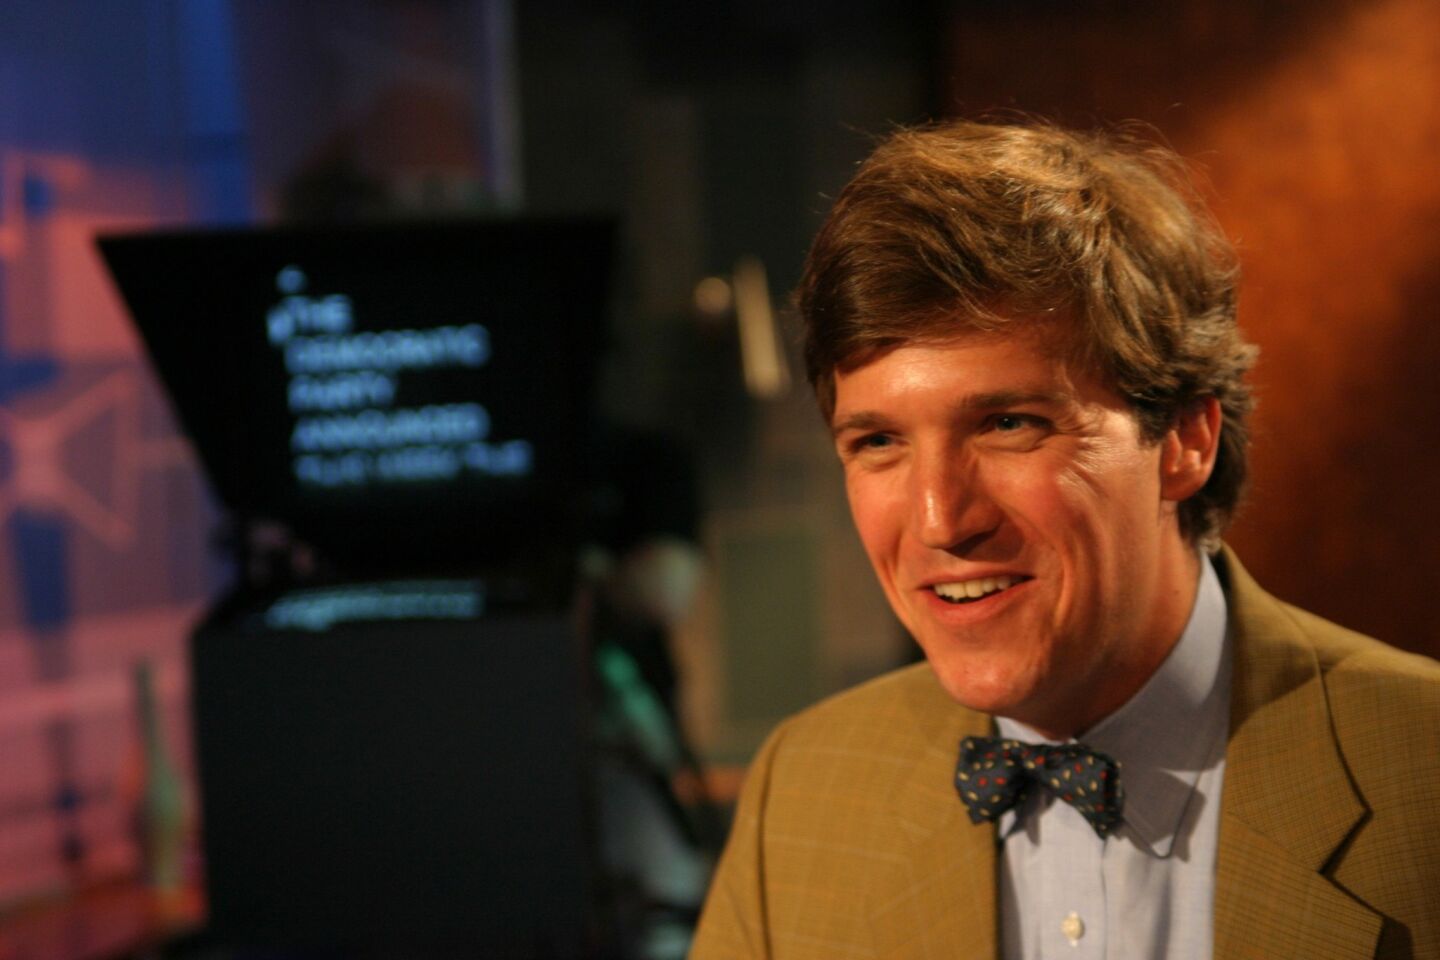 While the primary reason for "Tucker's" cancellation after three seasons was low ratings, Carlson stated that his network, MSNBC, had changed, and "they didn't have a role for me."